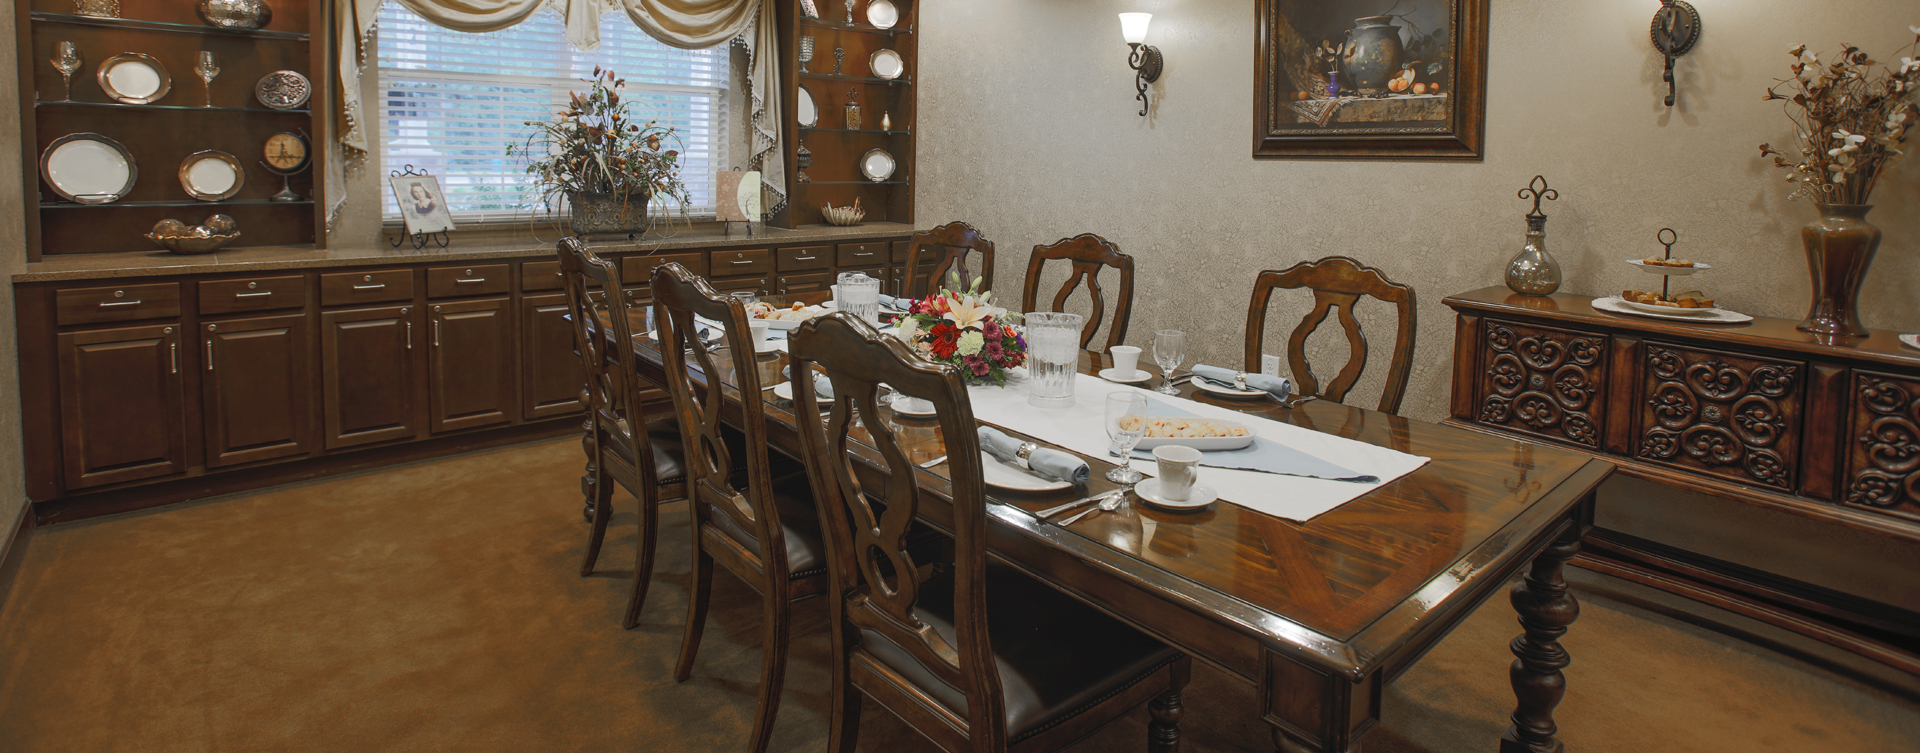 Food is best when shared with family and friends in the private dining room at Bickford of Carmel